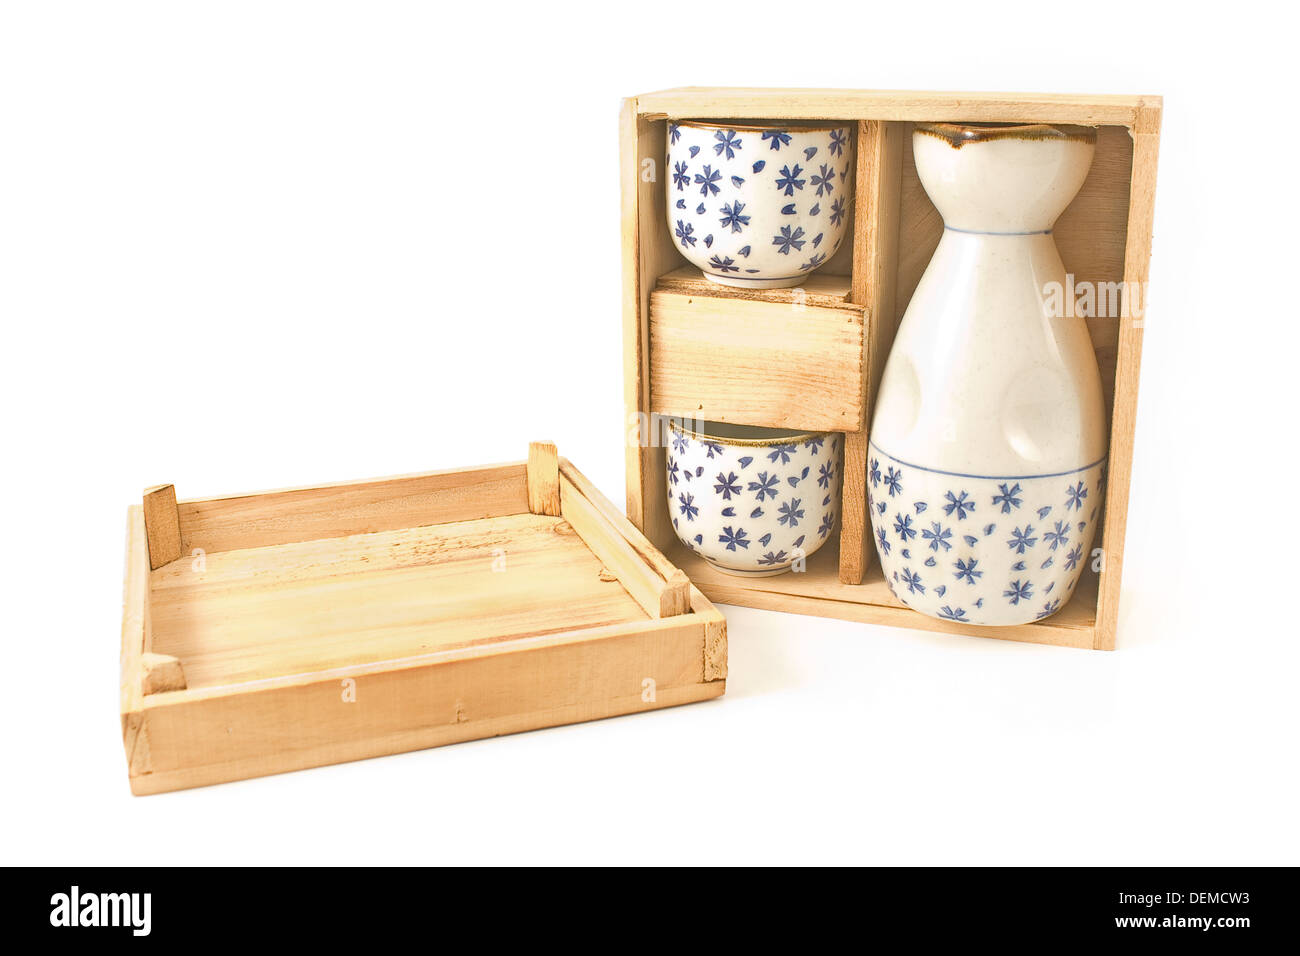 Antique porcelain vase and cups in wooden box isolated on white Stock Photo